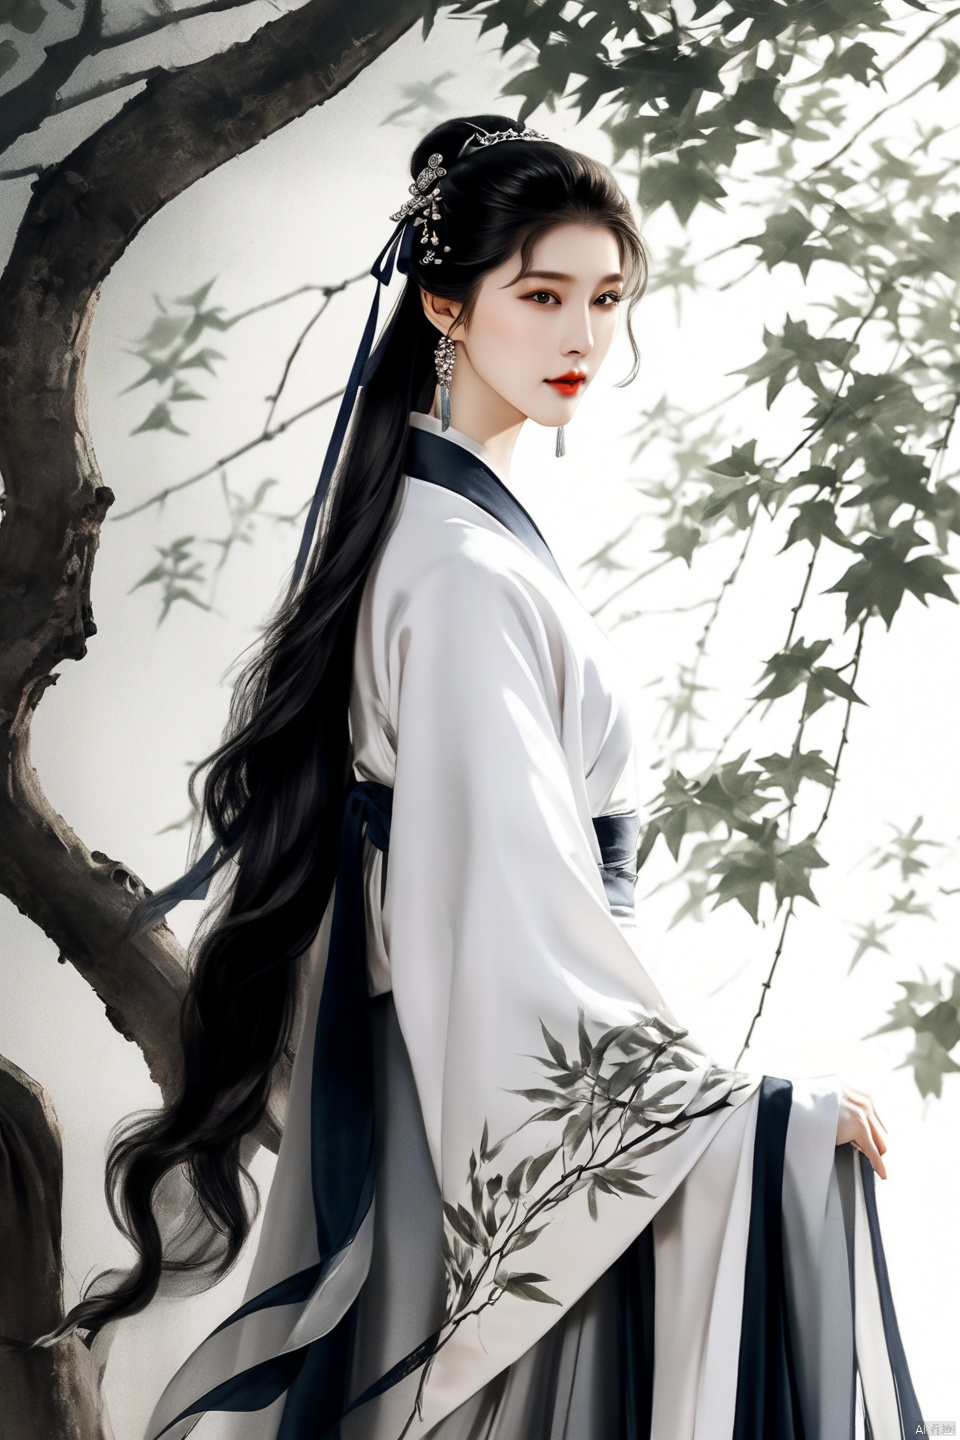  Fashion editorial style a asian girl with hanfu ruqun,Jin style, joint brand, ribbon, Withered leaves, old vines, plant illustration, splash ink,High fashion, trendy, stylish, editorial, magazine style, professional, highly detailed, cinematic lighting, Dramatic lighting, concept art, TIANQIJI